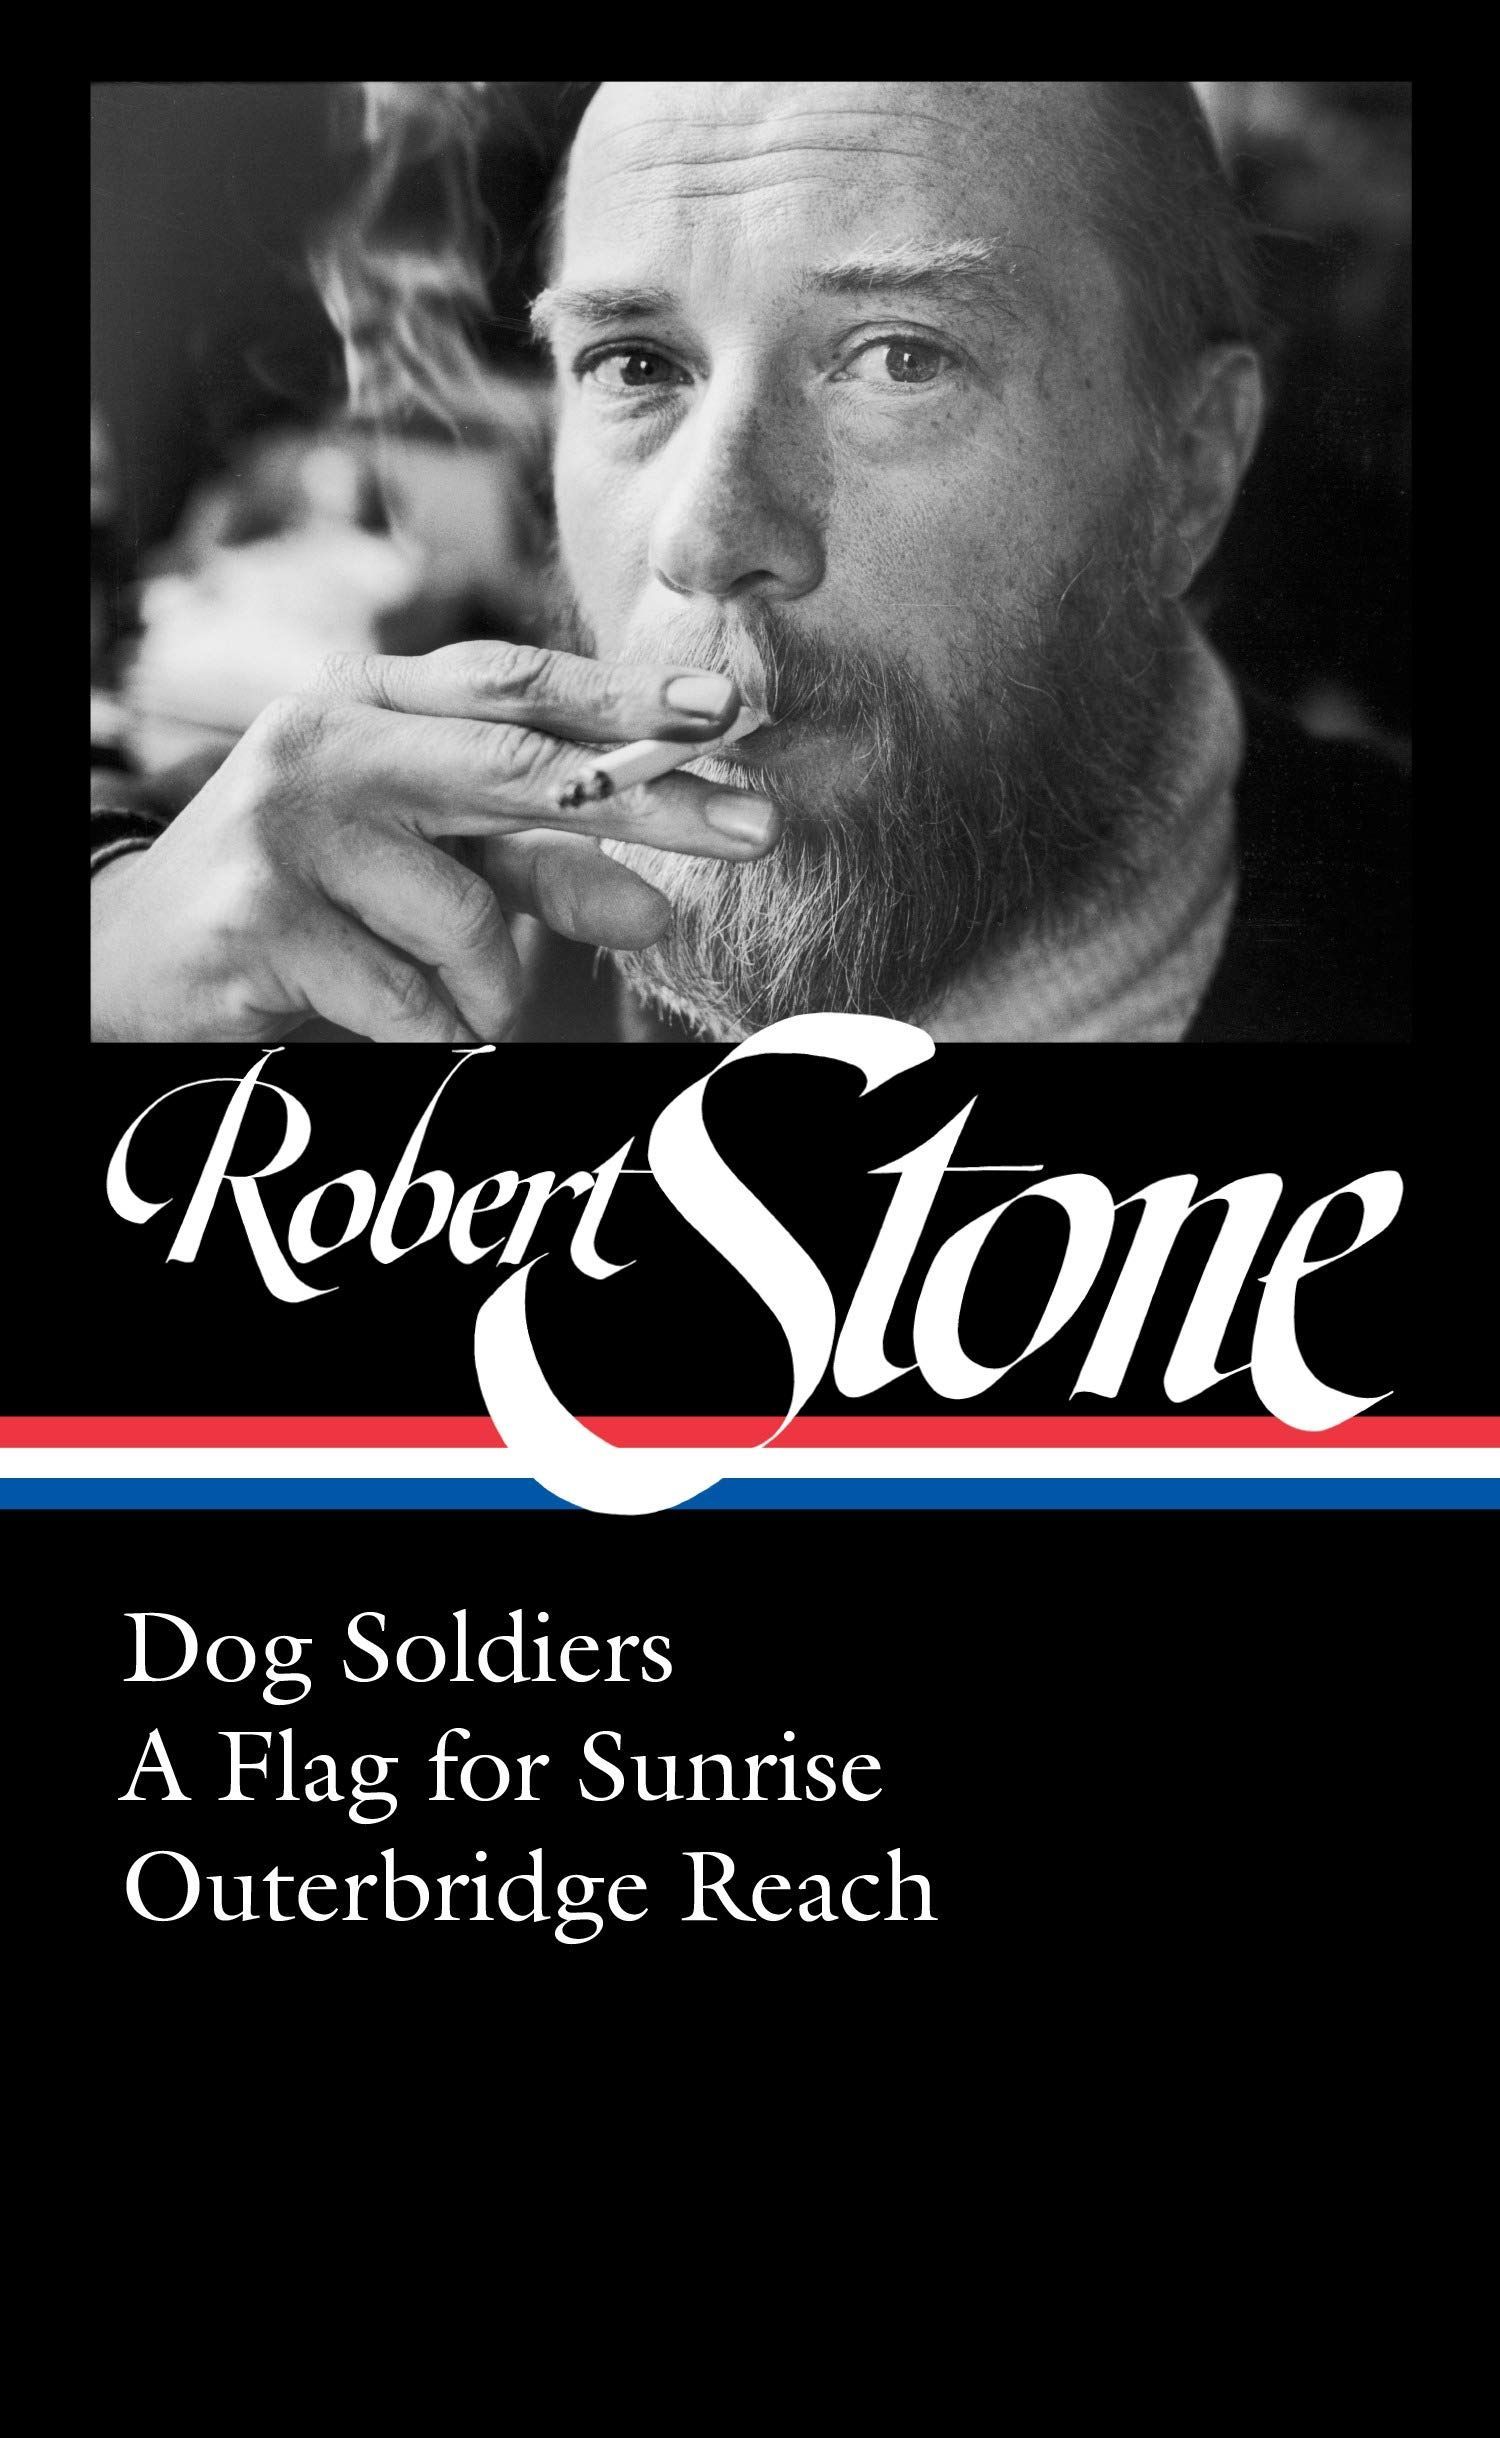 The News They Wanted Not to Hear: On Robert Stone